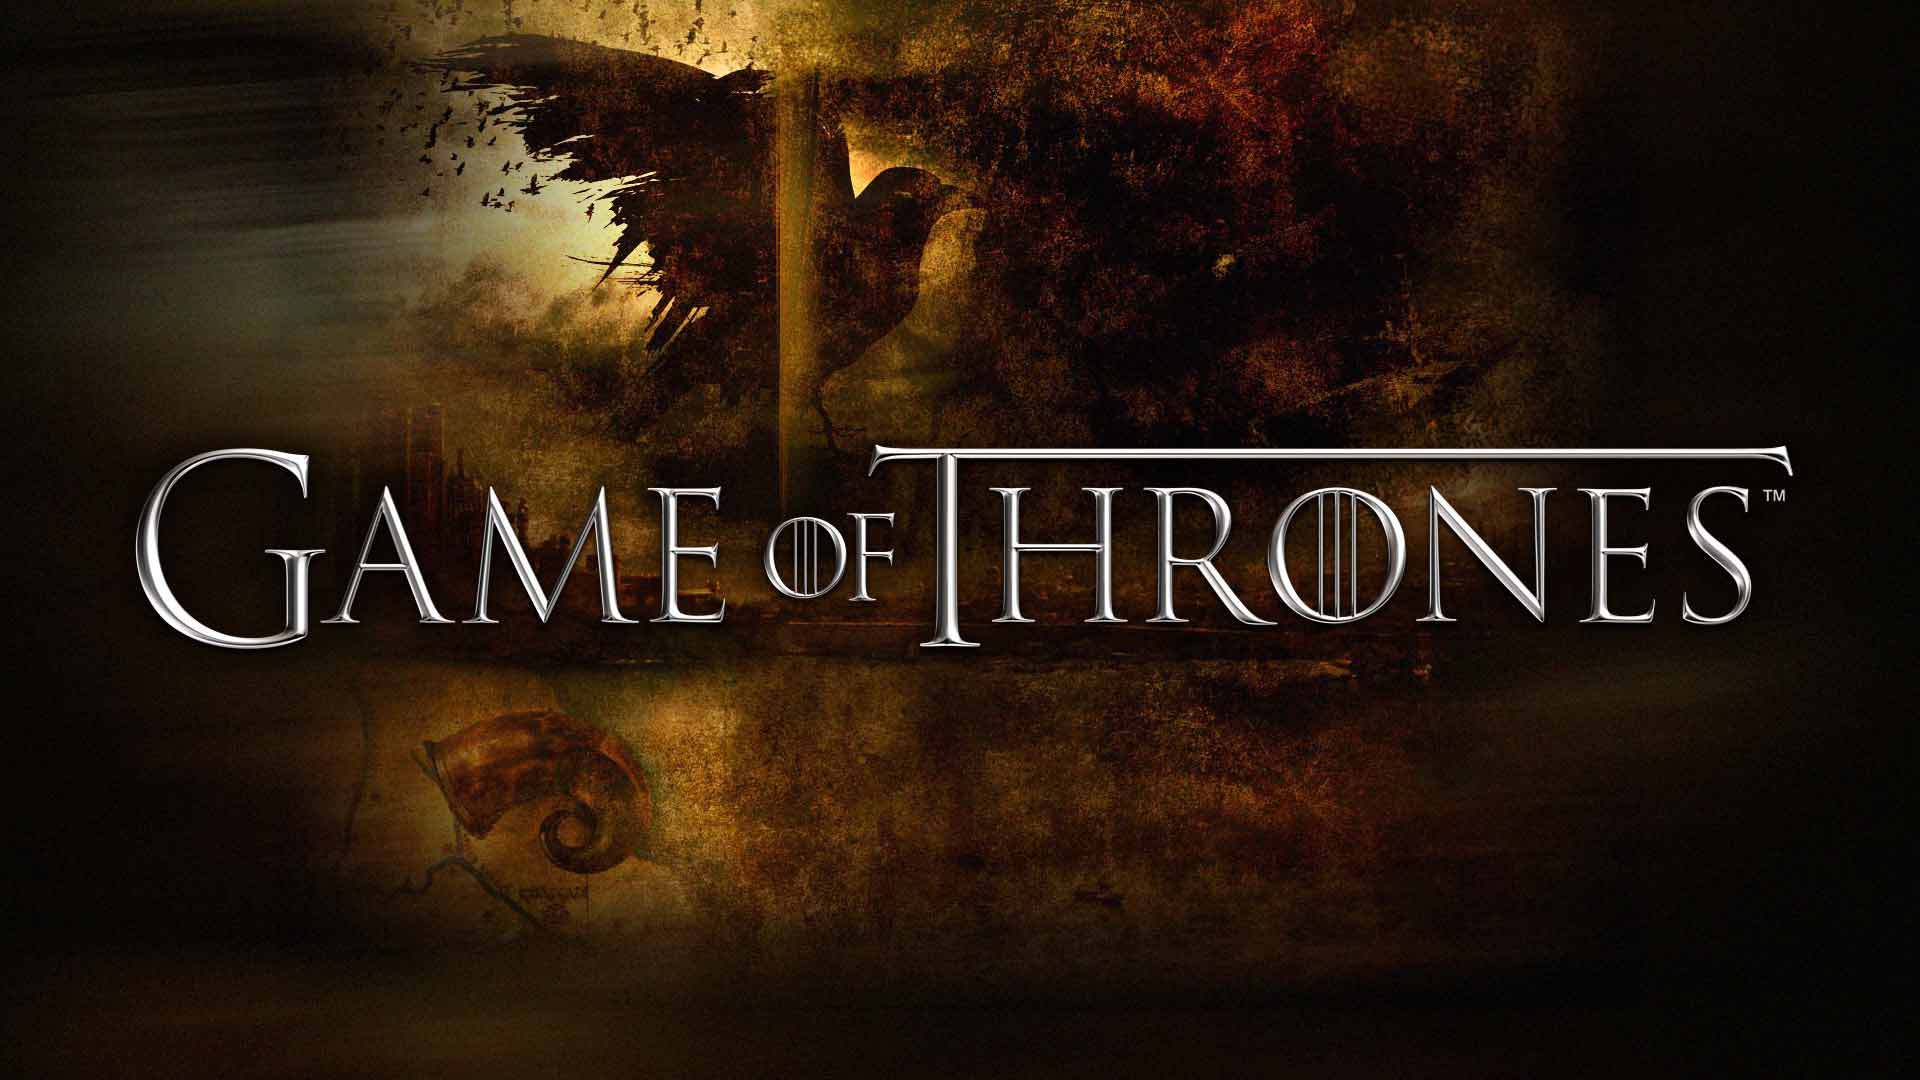 Game Of Thrones Wallpaper Collection For Free Download. HD